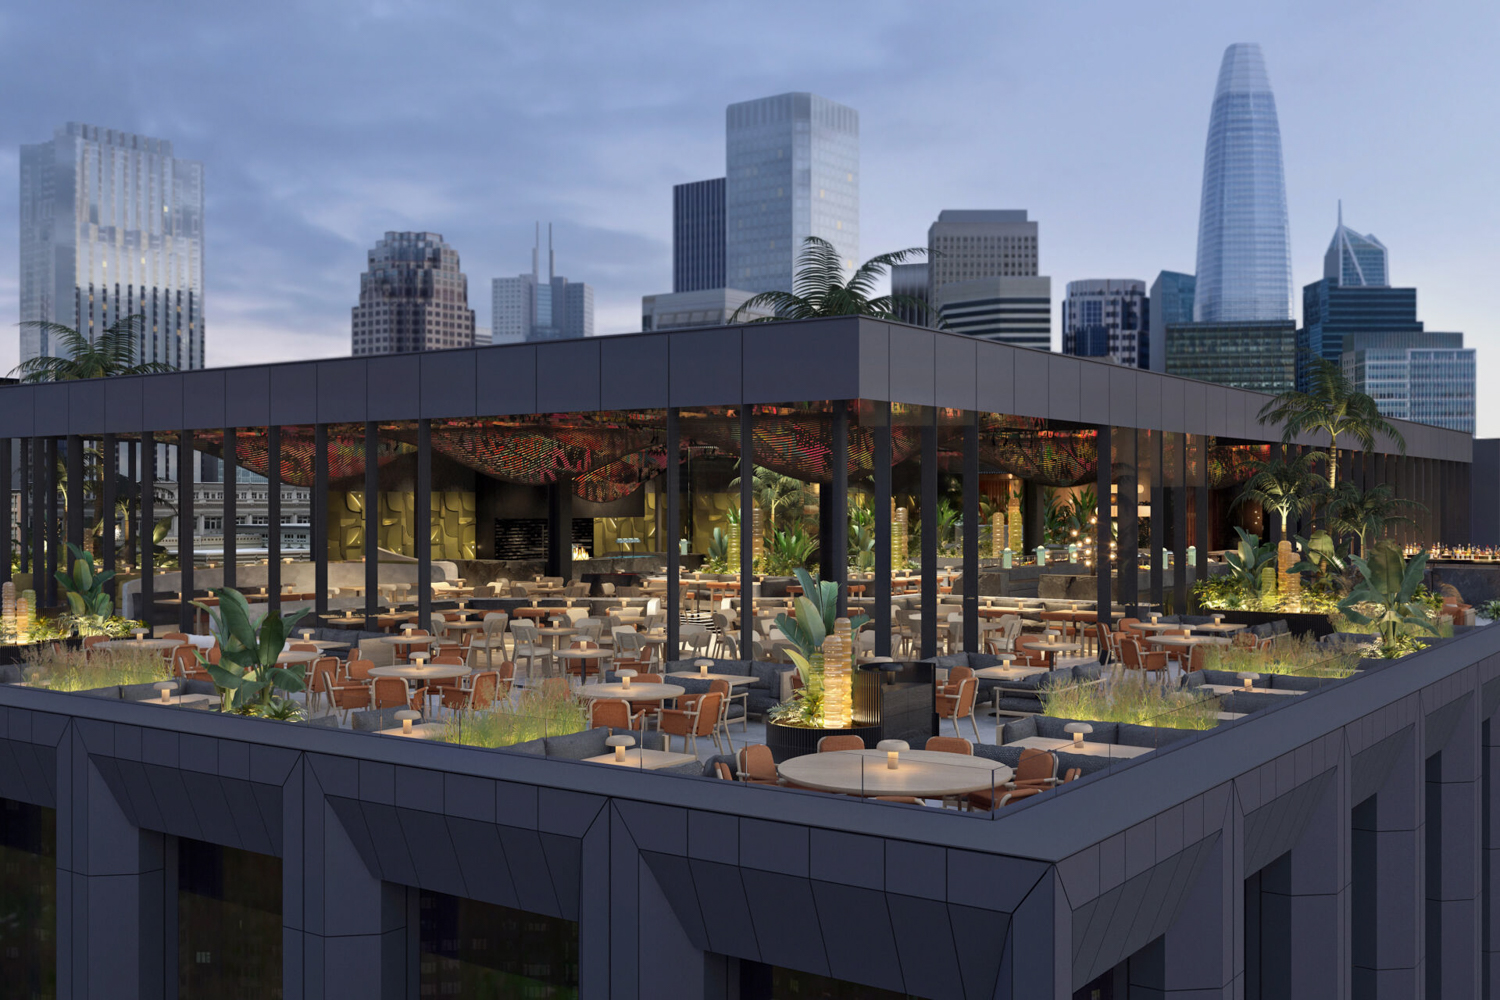 Chotto Matte rooftop view, rendering courtesy the restaurant